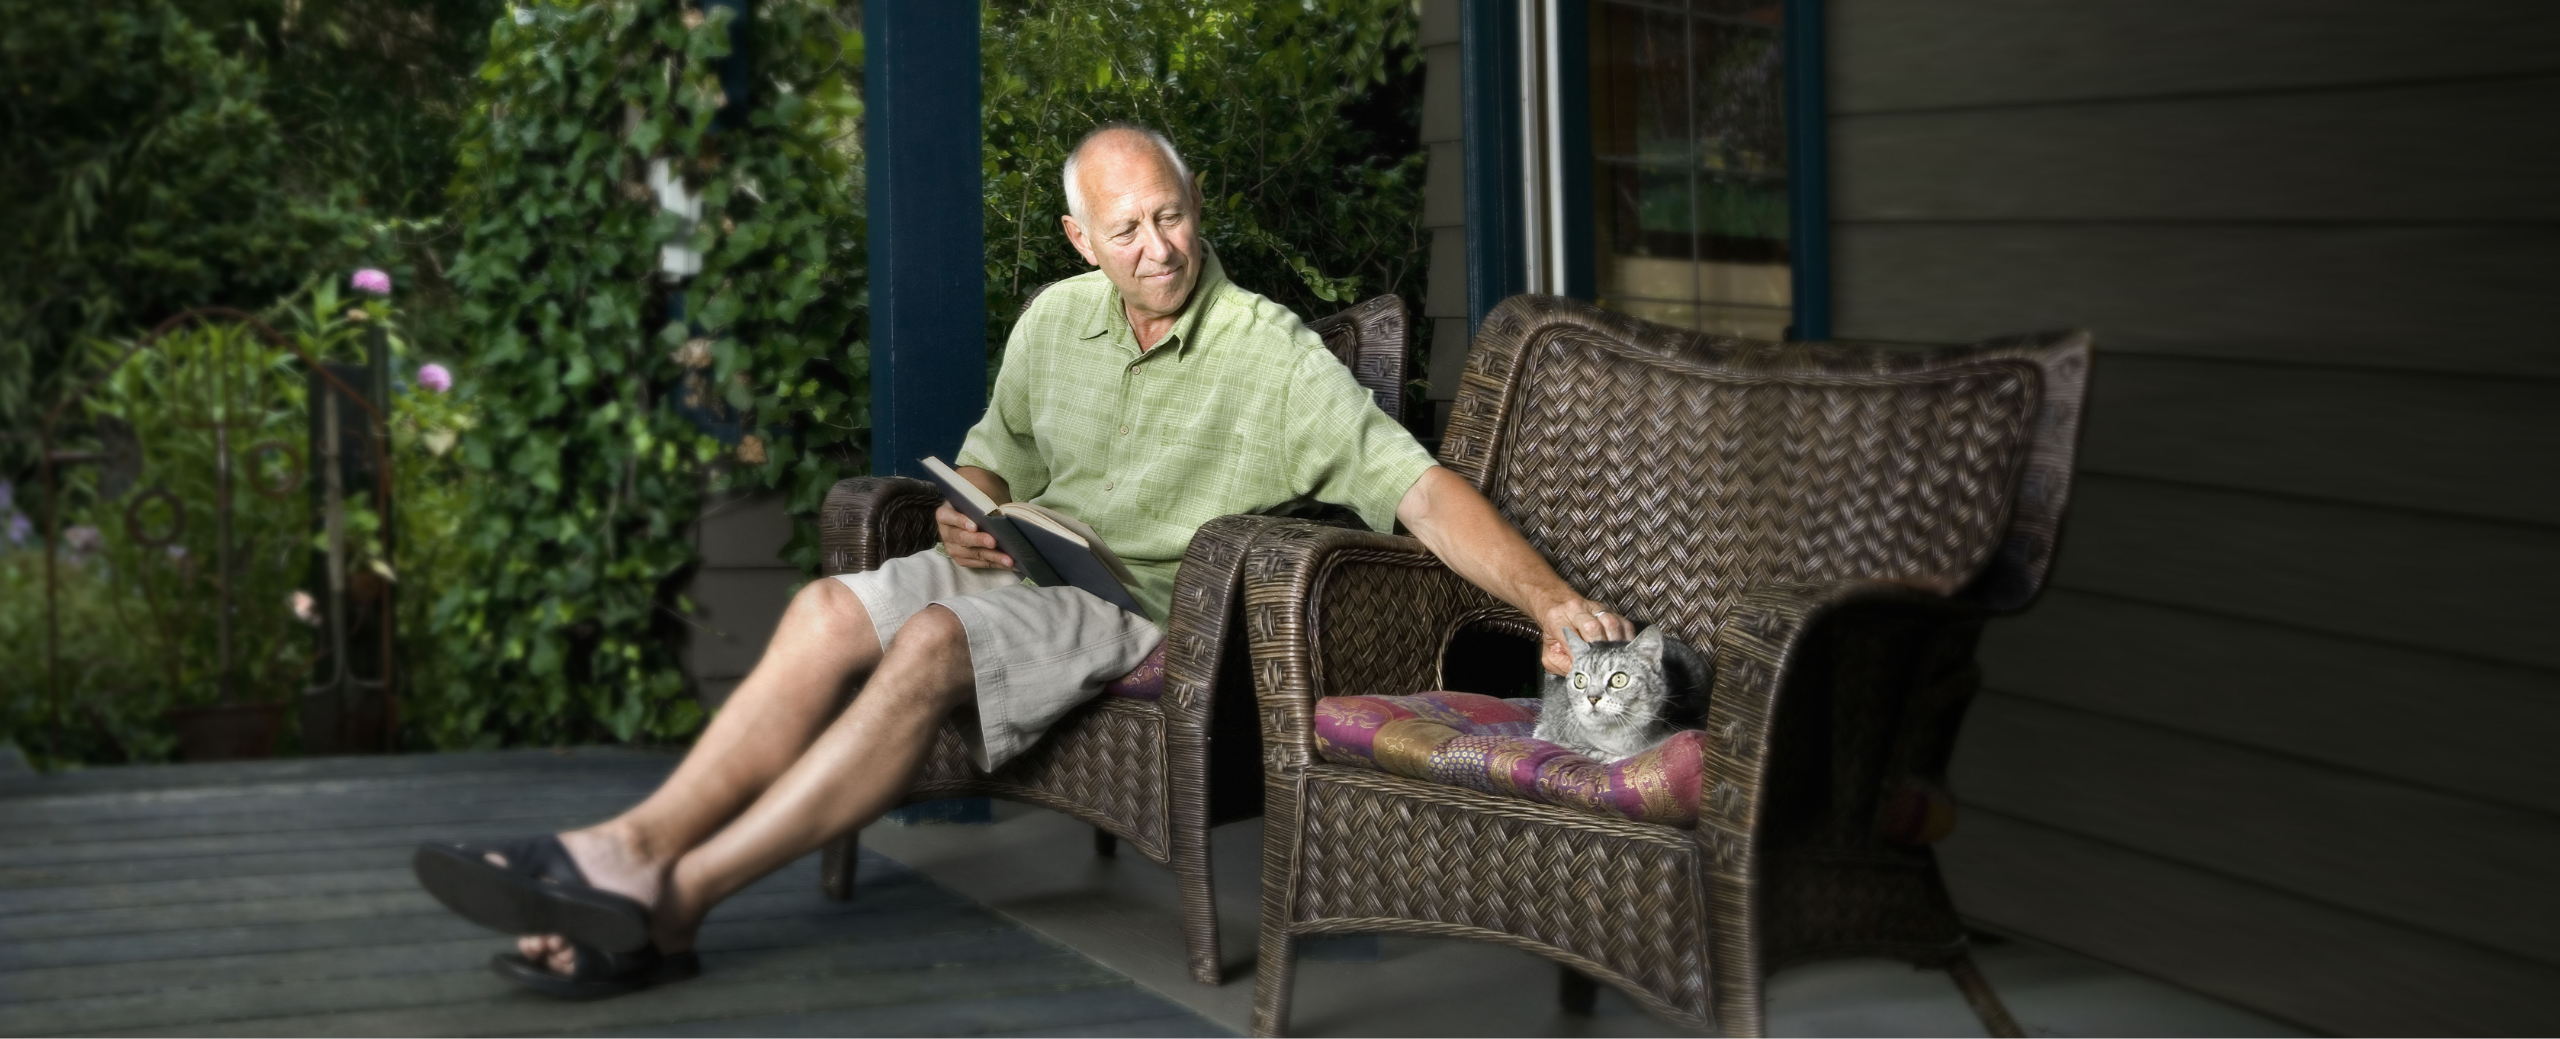 Man with metastatic pancreatic cancer sitting in outdoor chair with a book in his lap and petting a cat.